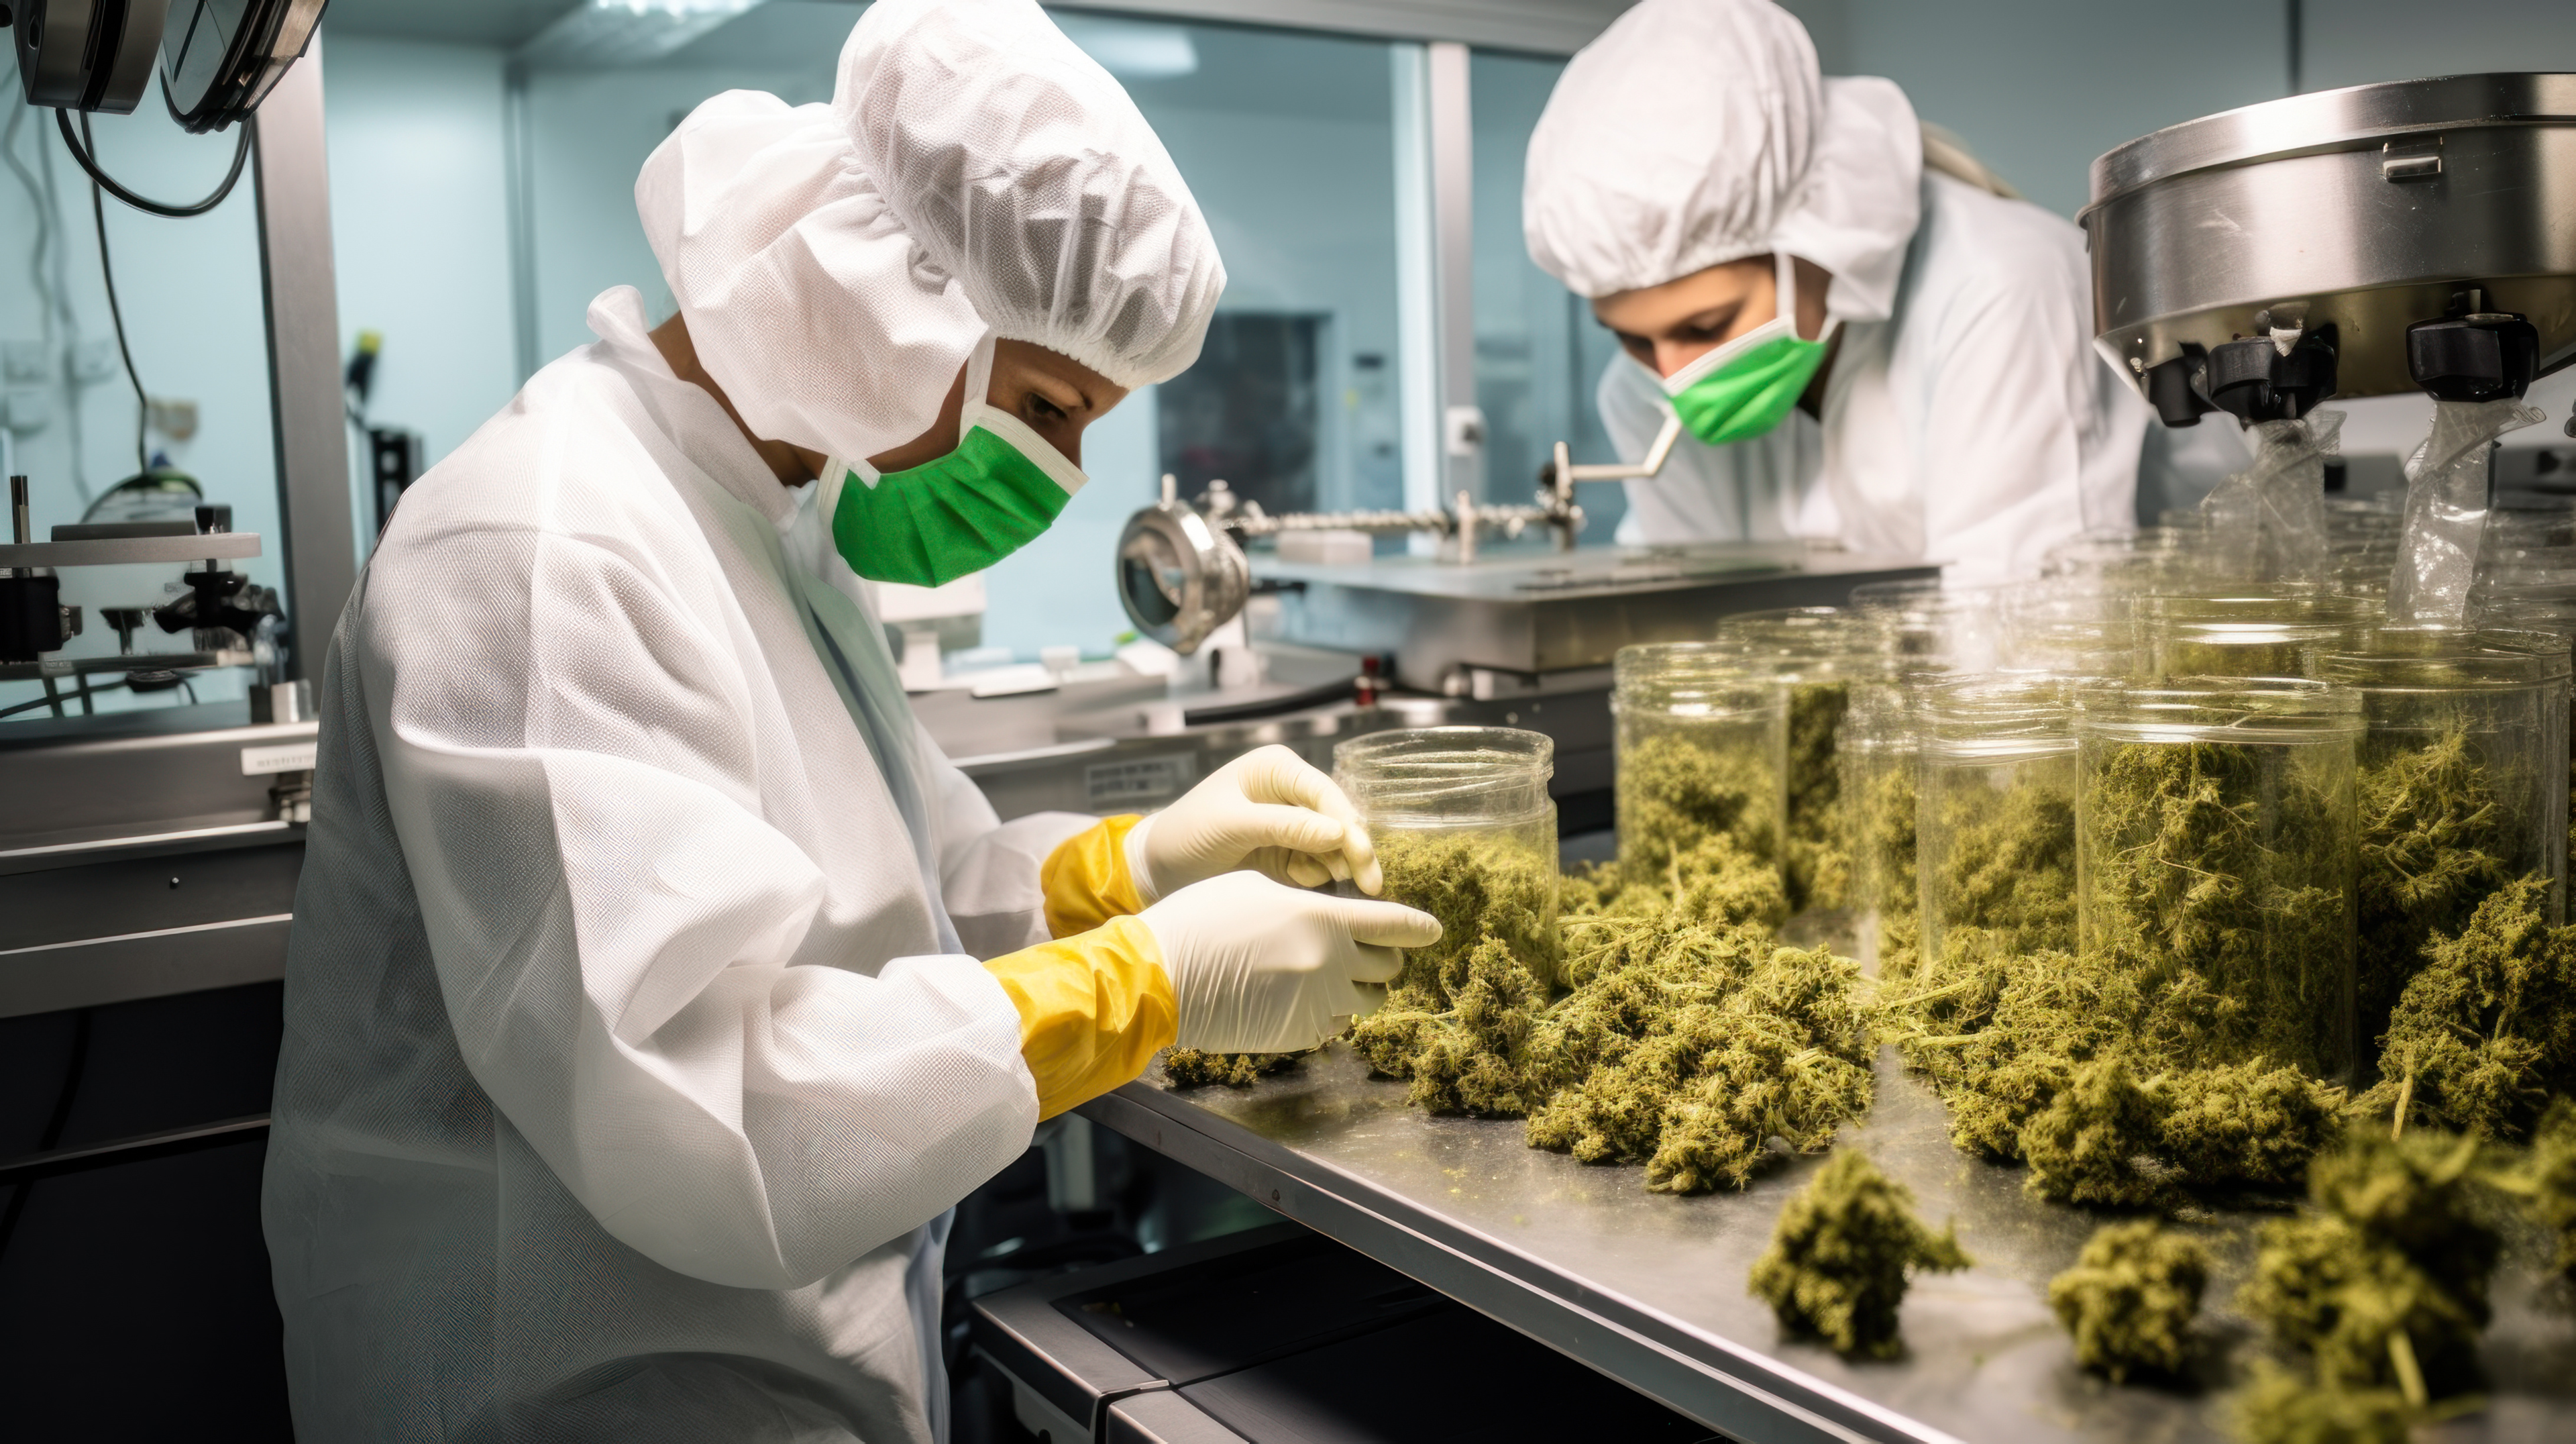 Whether placebo-controlled trials or looking into other treatment approval for hemp and hemp products, marijuana, and other cannabis related products are being researched as potentially established alternatives based on findings from investigators on cannabinoids.